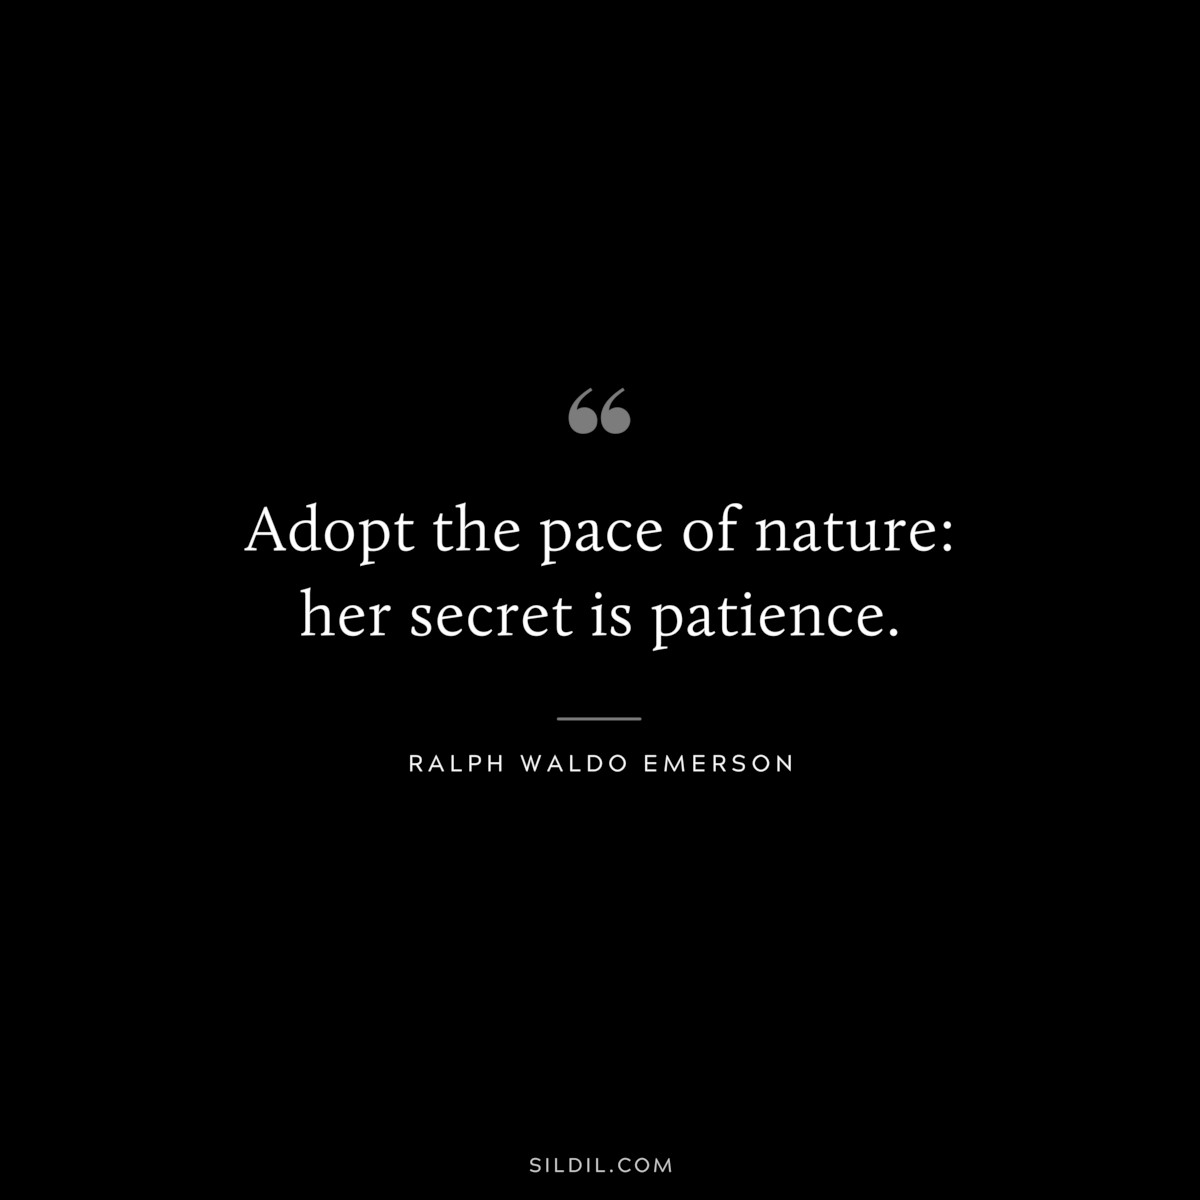 Adopt the pace of nature: her secret is patience. — Ralph Waldo Emerson